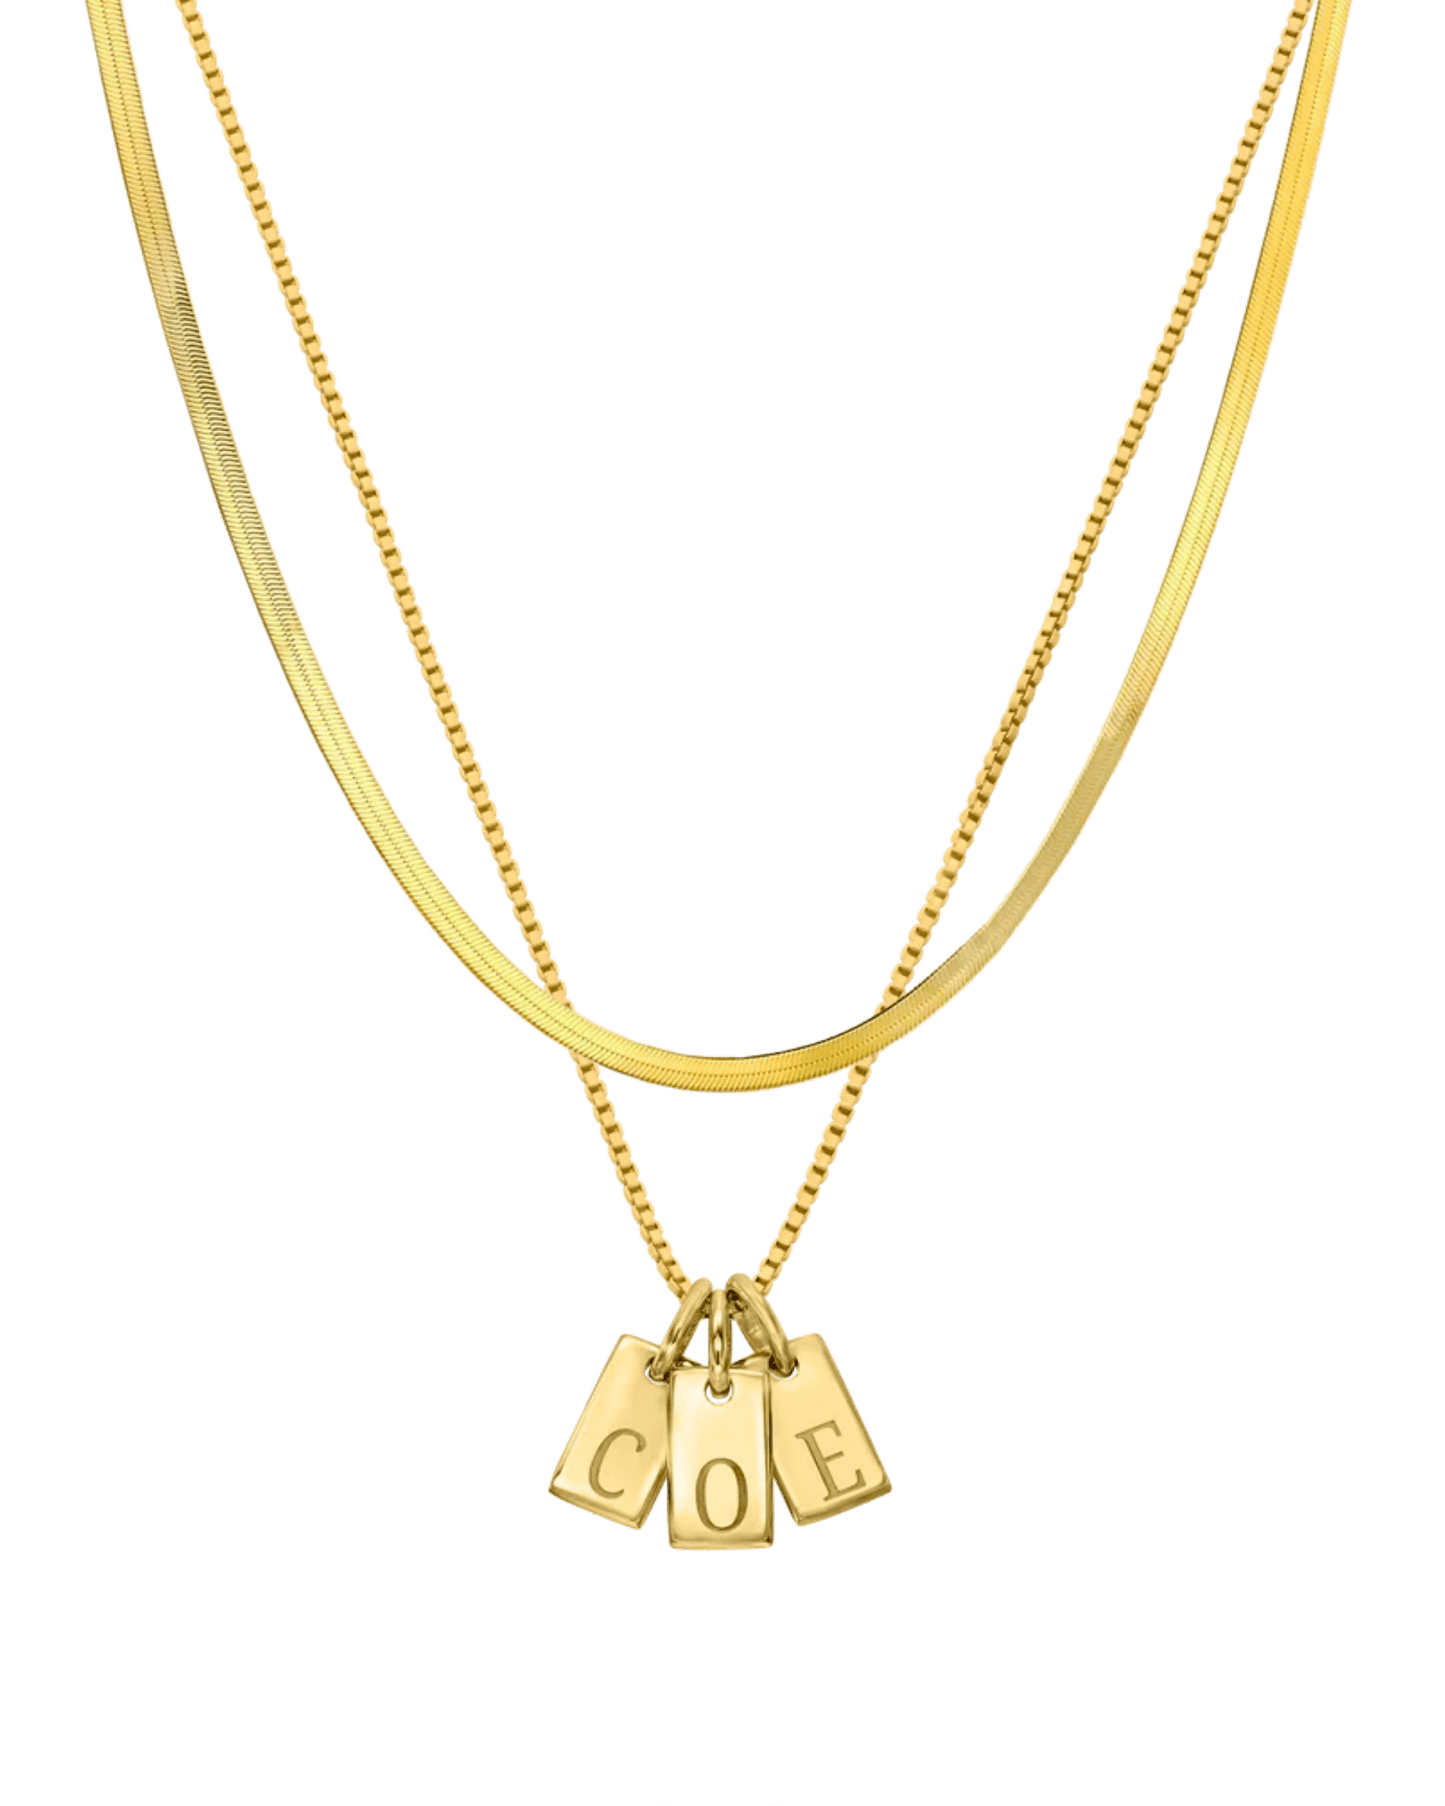 Set of Initial Mini Dogtag & Herringbone Chain Necklaces - 18K Gold Vermeil Necklaces magal-dev 1 Tag 